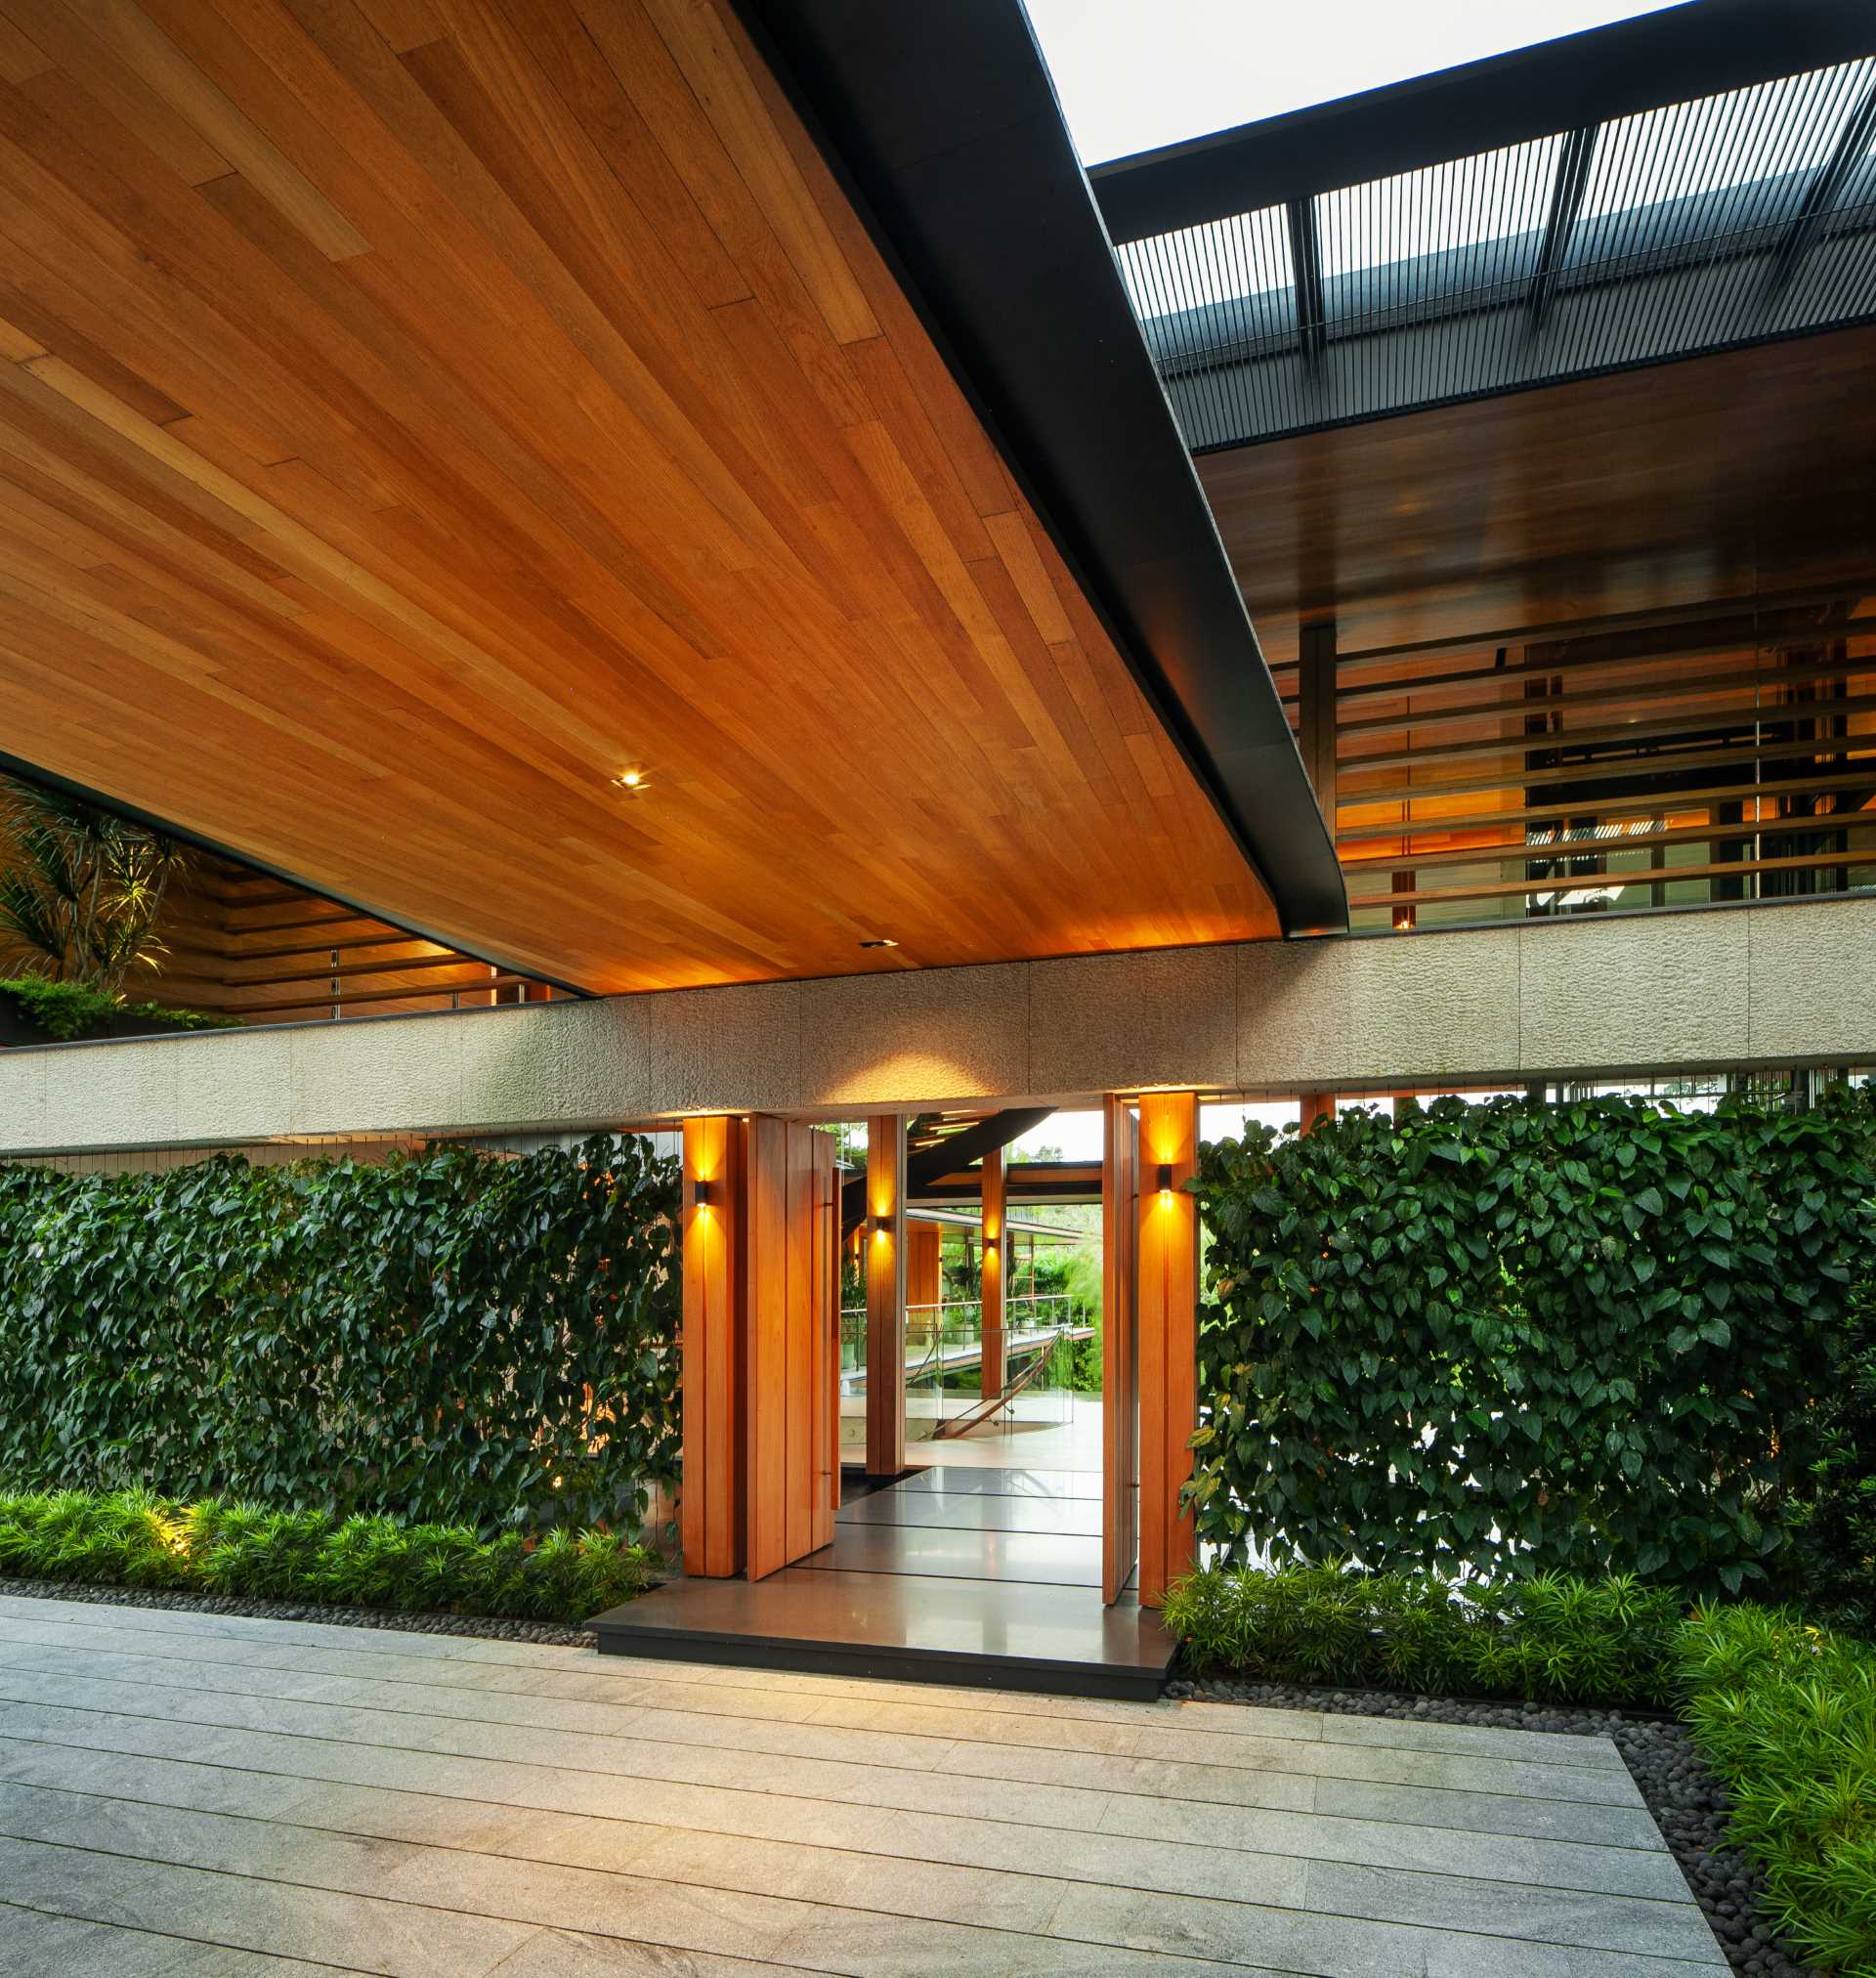 A modern house with plenty of greenery and water features that help keep the home cool.